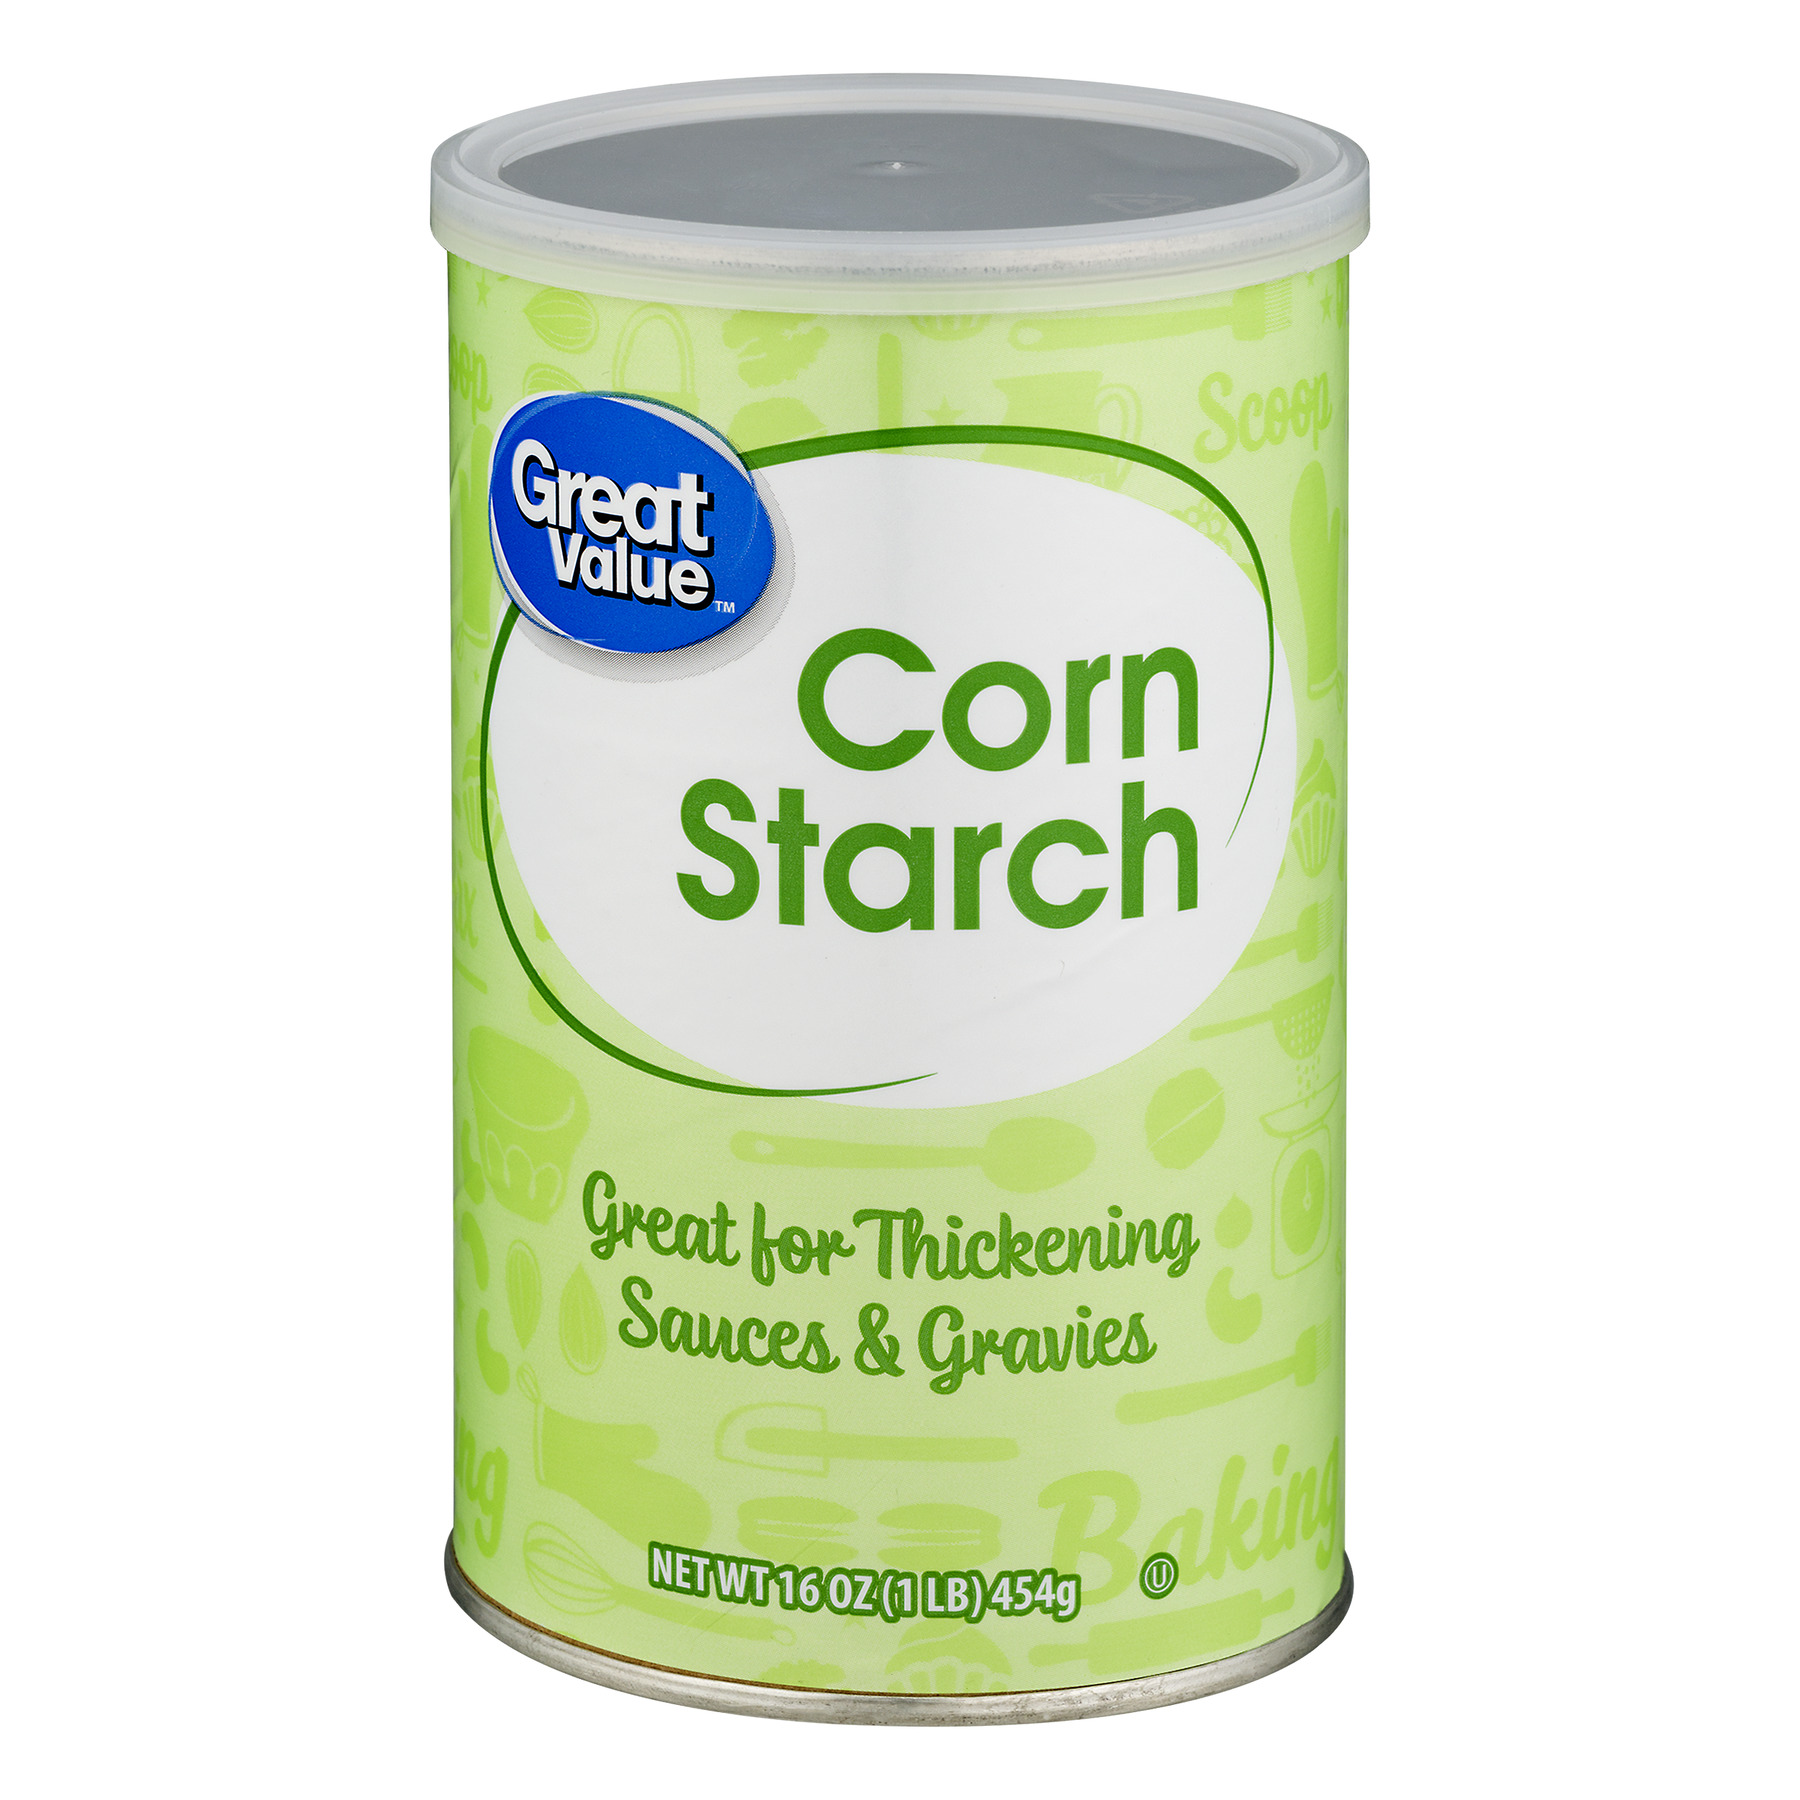 (4 Pack) Great Value Corn Starch, 16 Oz